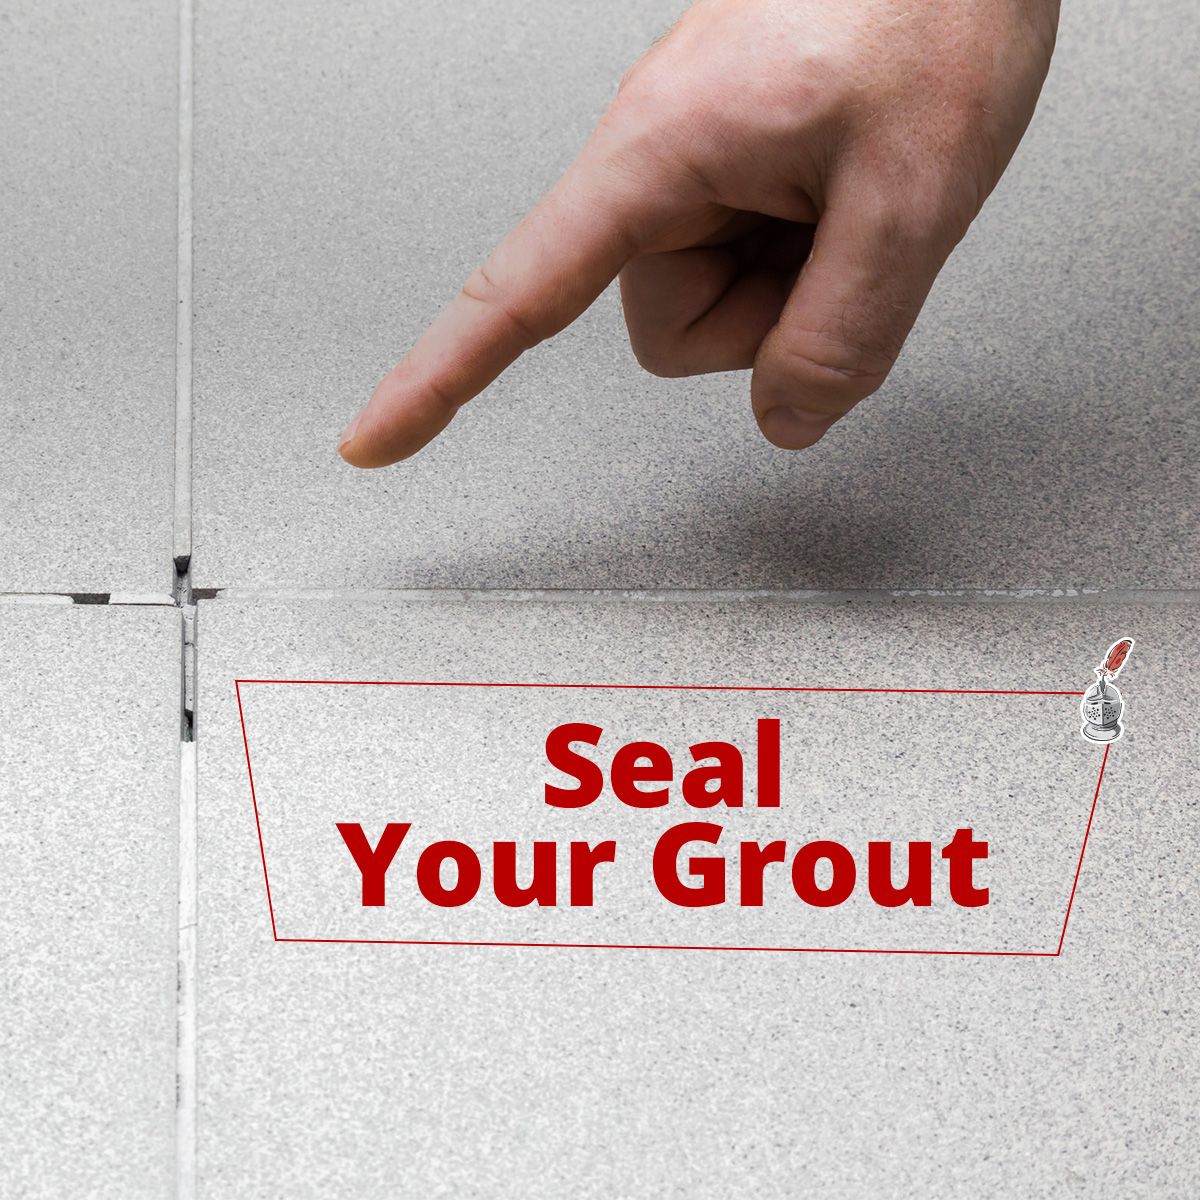 Seal Your Grout